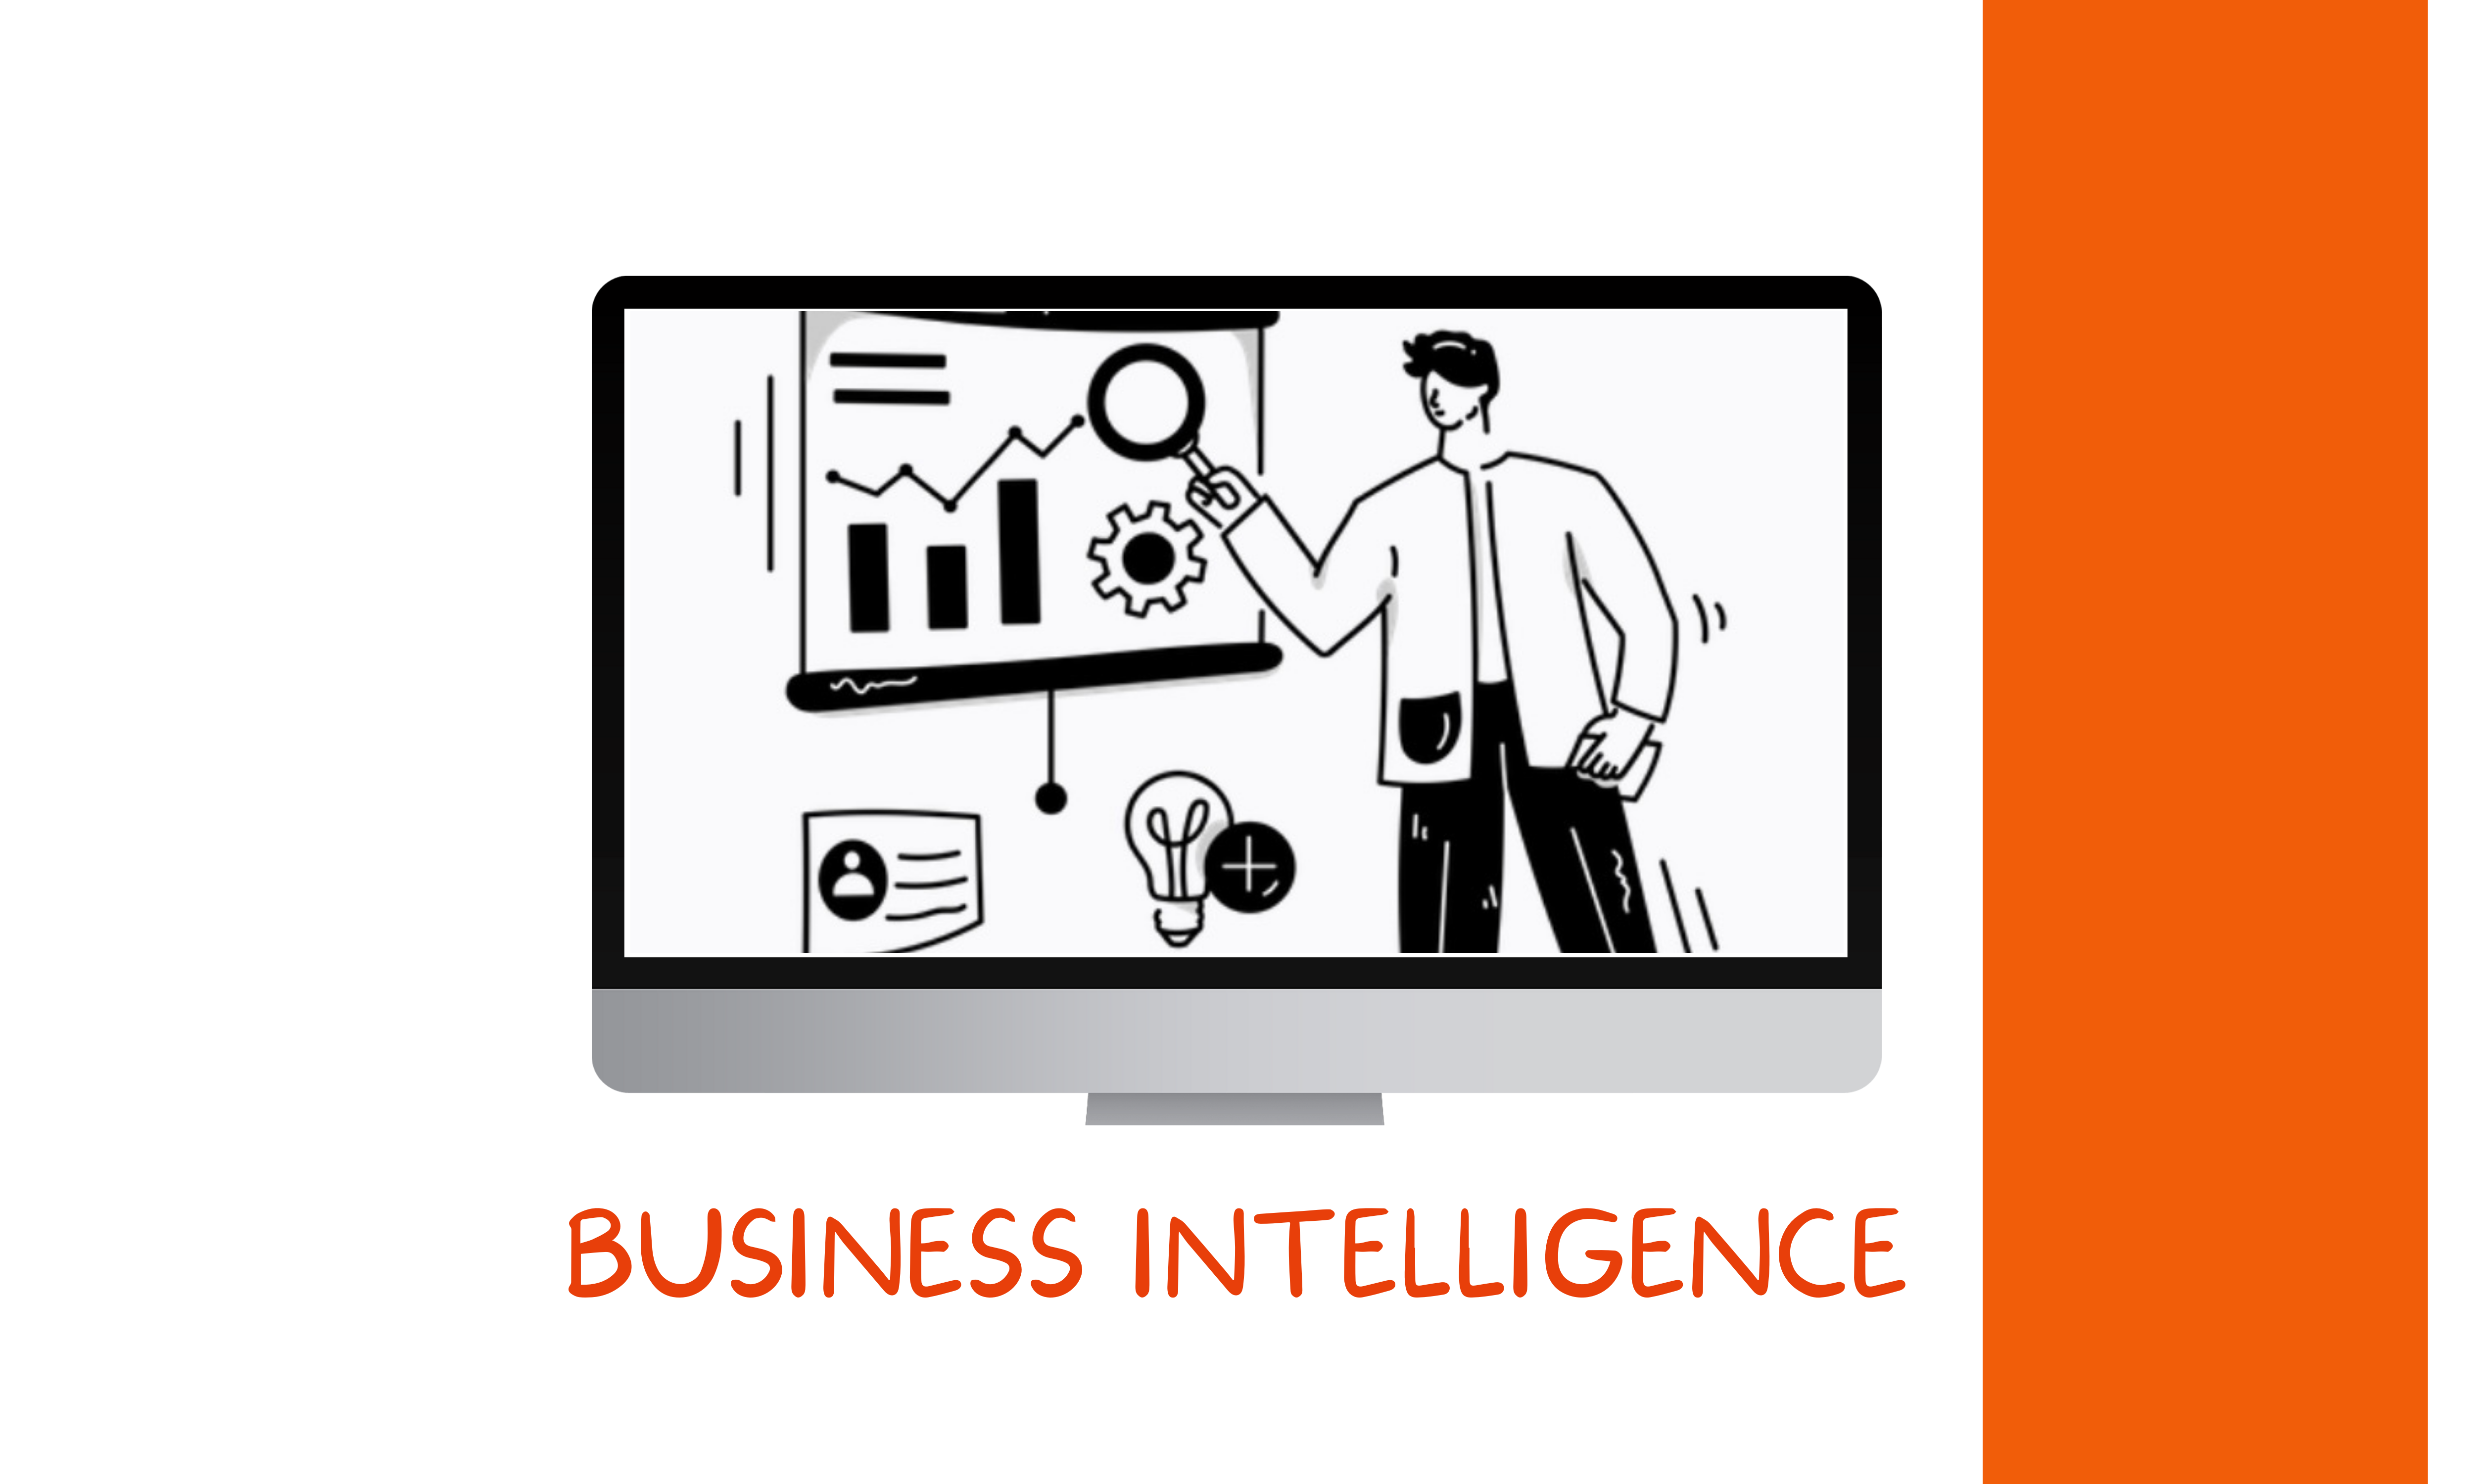 ADVANTAGES OF BUSINESS INTELLIGENCE SOFTWARE